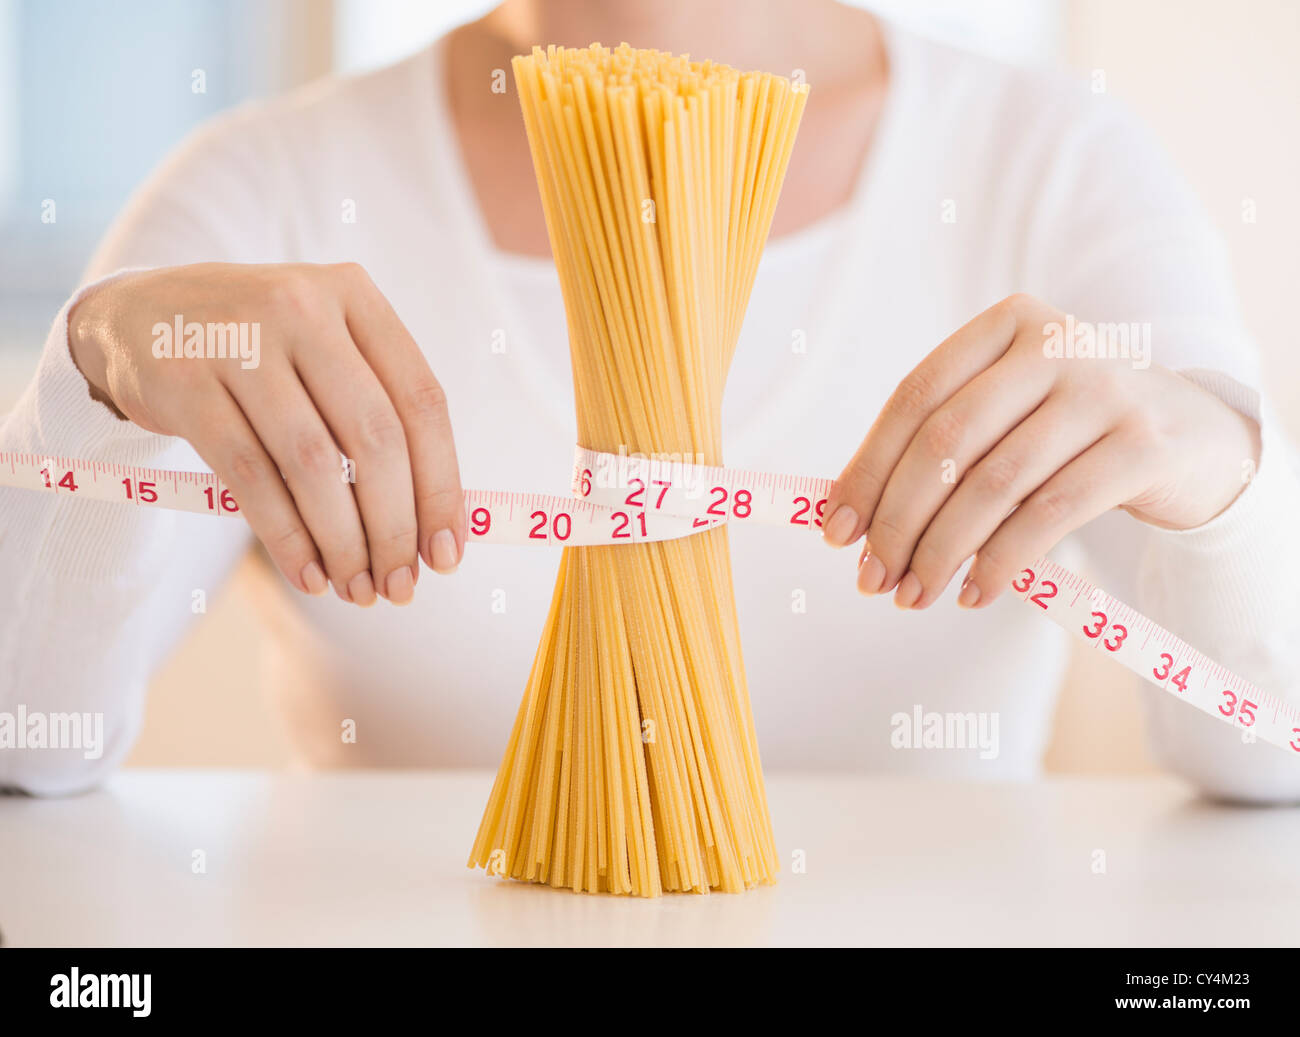 USA, New Jersey, Jersey City, Close up of woman's hands measuring pasta with tape measure Stock Photo